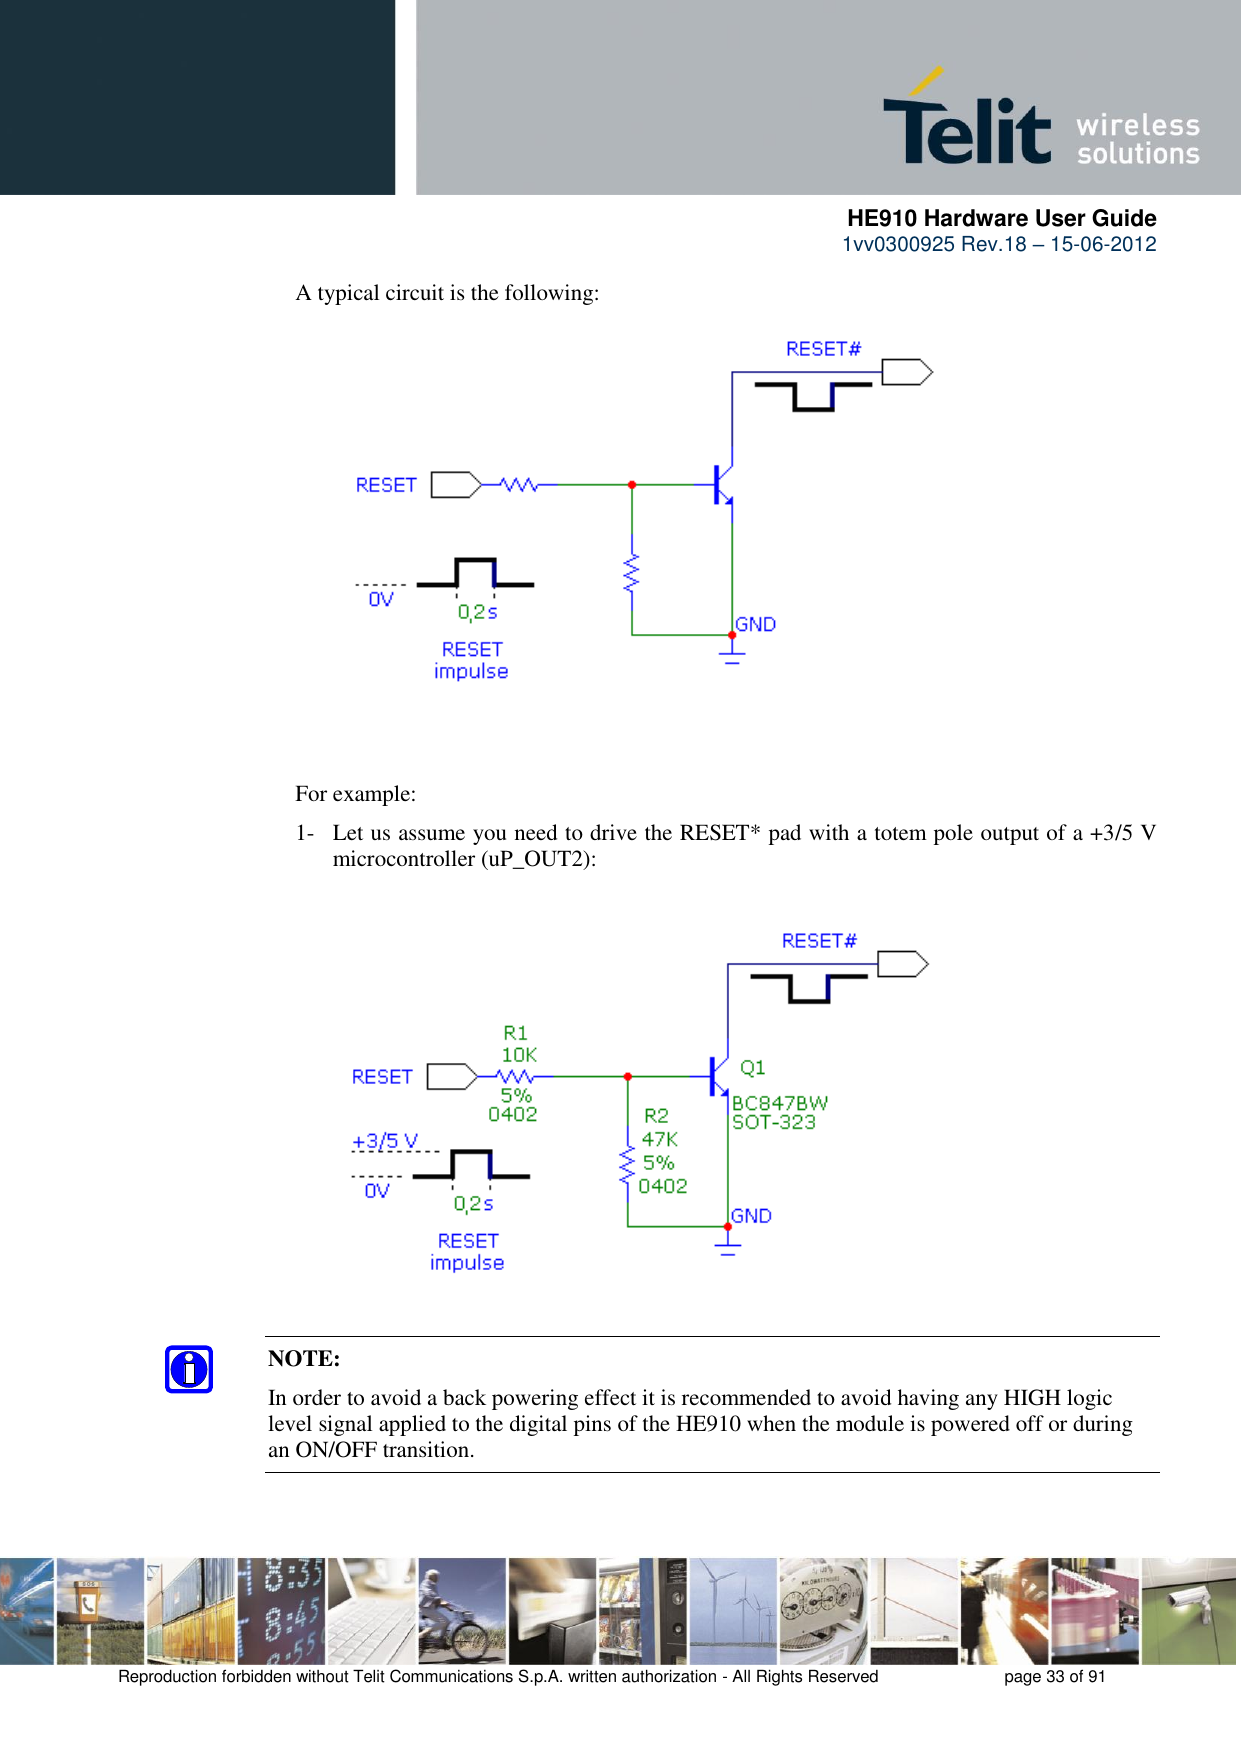      HE910 Hardware User Guide 1vv0300925 Rev.18 – 15-06-2012    Reproduction forbidden without Telit Communications S.p.A. written authorization - All Rights Reserved    page 33 of 91  A typical circuit is the following: For example: 1- Let us assume you need to drive the RESET* pad with a totem pole output of a +3/5 V microcontroller (uP_OUT2): NOTE: In order to avoid a back powering effect it is recommended to avoid having any HIGH logic level signal applied to the digital pins of the HE910 when the module is powered off or during an ON/OFF transition.   